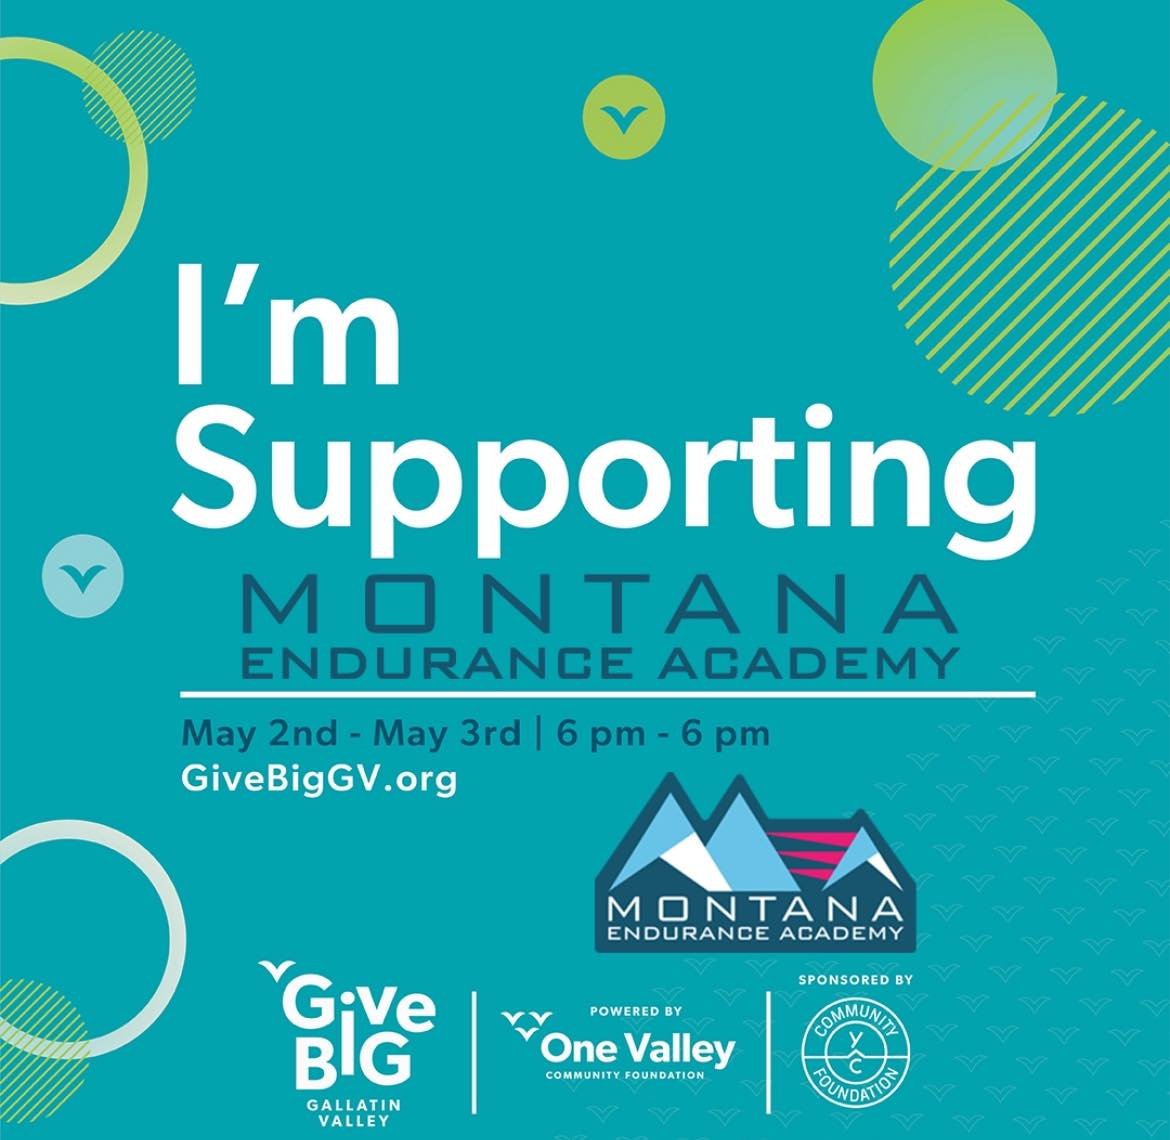 This is your chance to be a part of our community's day of giving - an opportunity to unite our community around causes in which we truly believe and help nonprofit organizations connect to the larger community.
Tomorrow, May2nd at 6pm visit givebigg